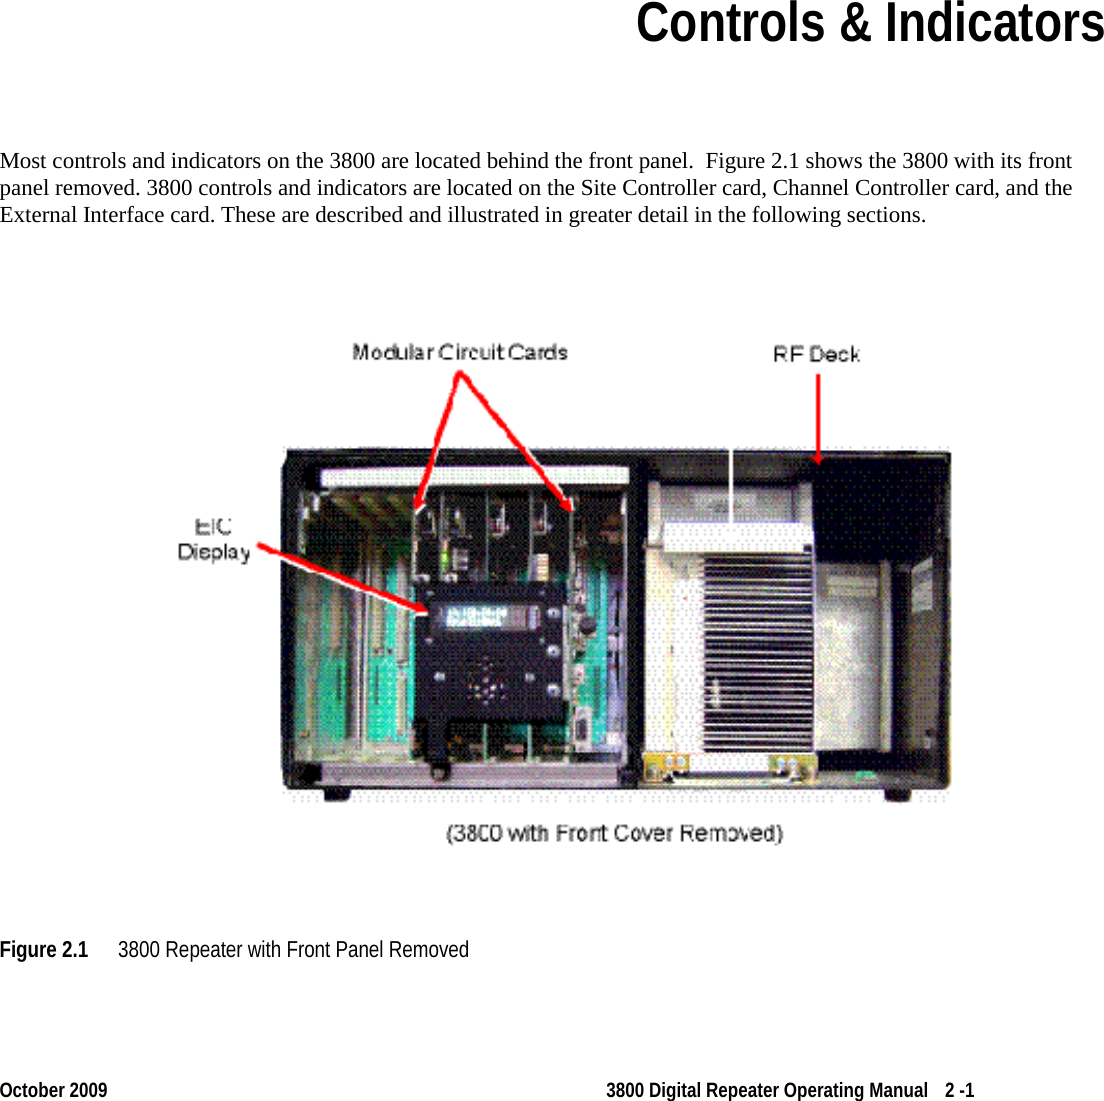  October 2009 3800 Digital Repeater Operating Manual 2 -1 Section 2 Section 2Controls &amp; Indicators Most controls and indicators on the 3800 are located behind the front panel.  Figure 2.1 shows the 3800 with its front panel removed. 3800 controls and indicators are located on the Site Controller card, Channel Controller card, and the External Interface card. These are described and illustrated in greater detail in the following sections. Figure 2.1 3800 Repeater with Front Panel Removed 